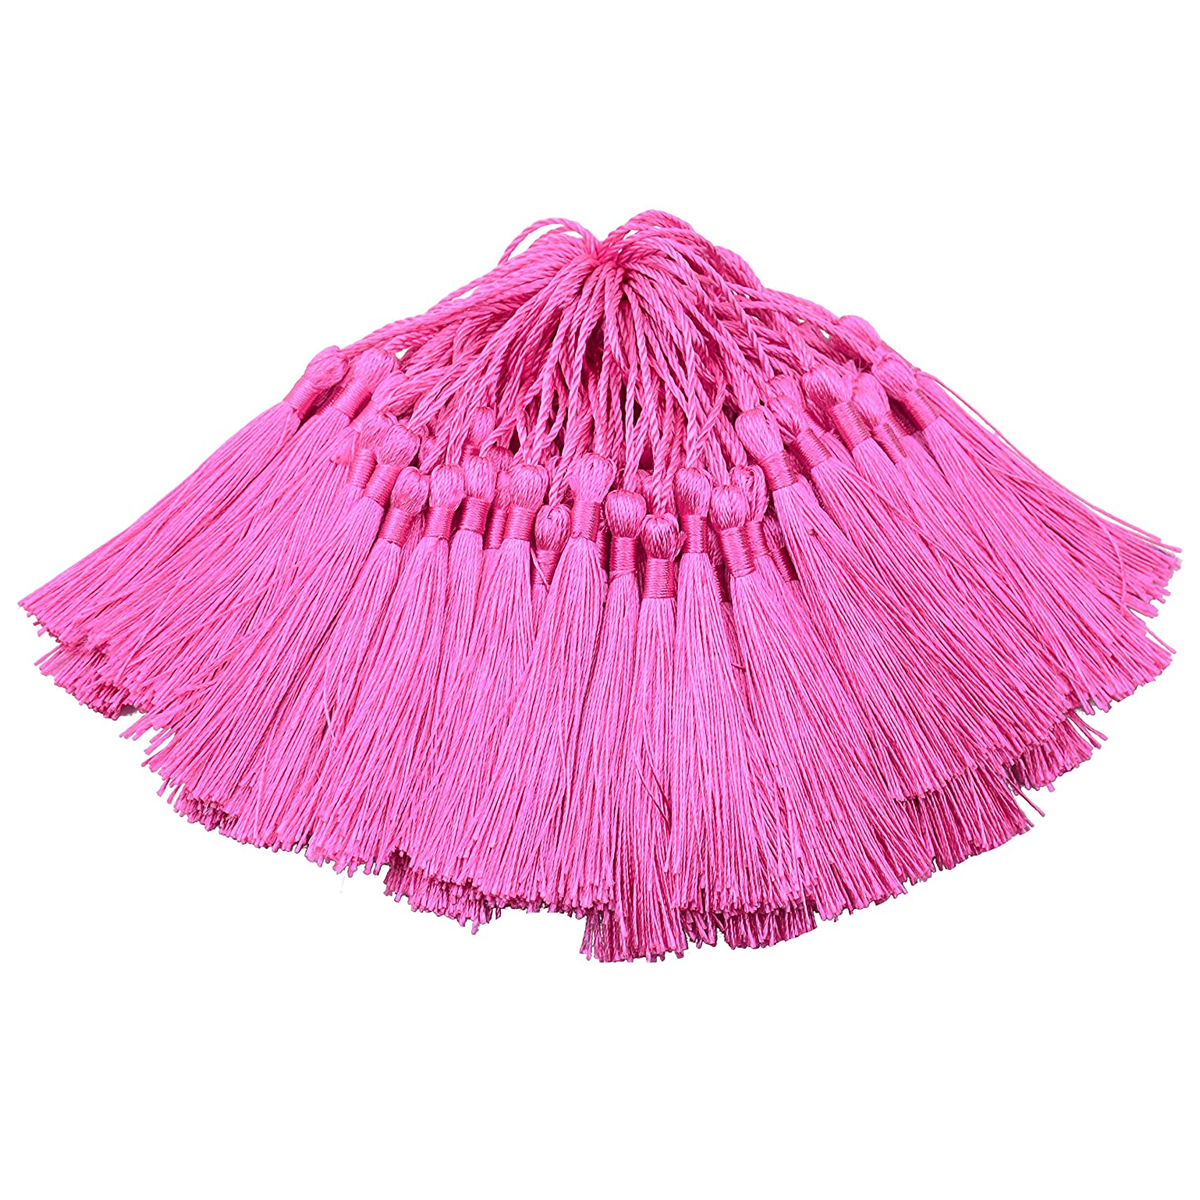 96 PCS Dark Pink Soft Craft Tassels with Loops for Jewelry Making, DIY, Bookmark, - WILLOW